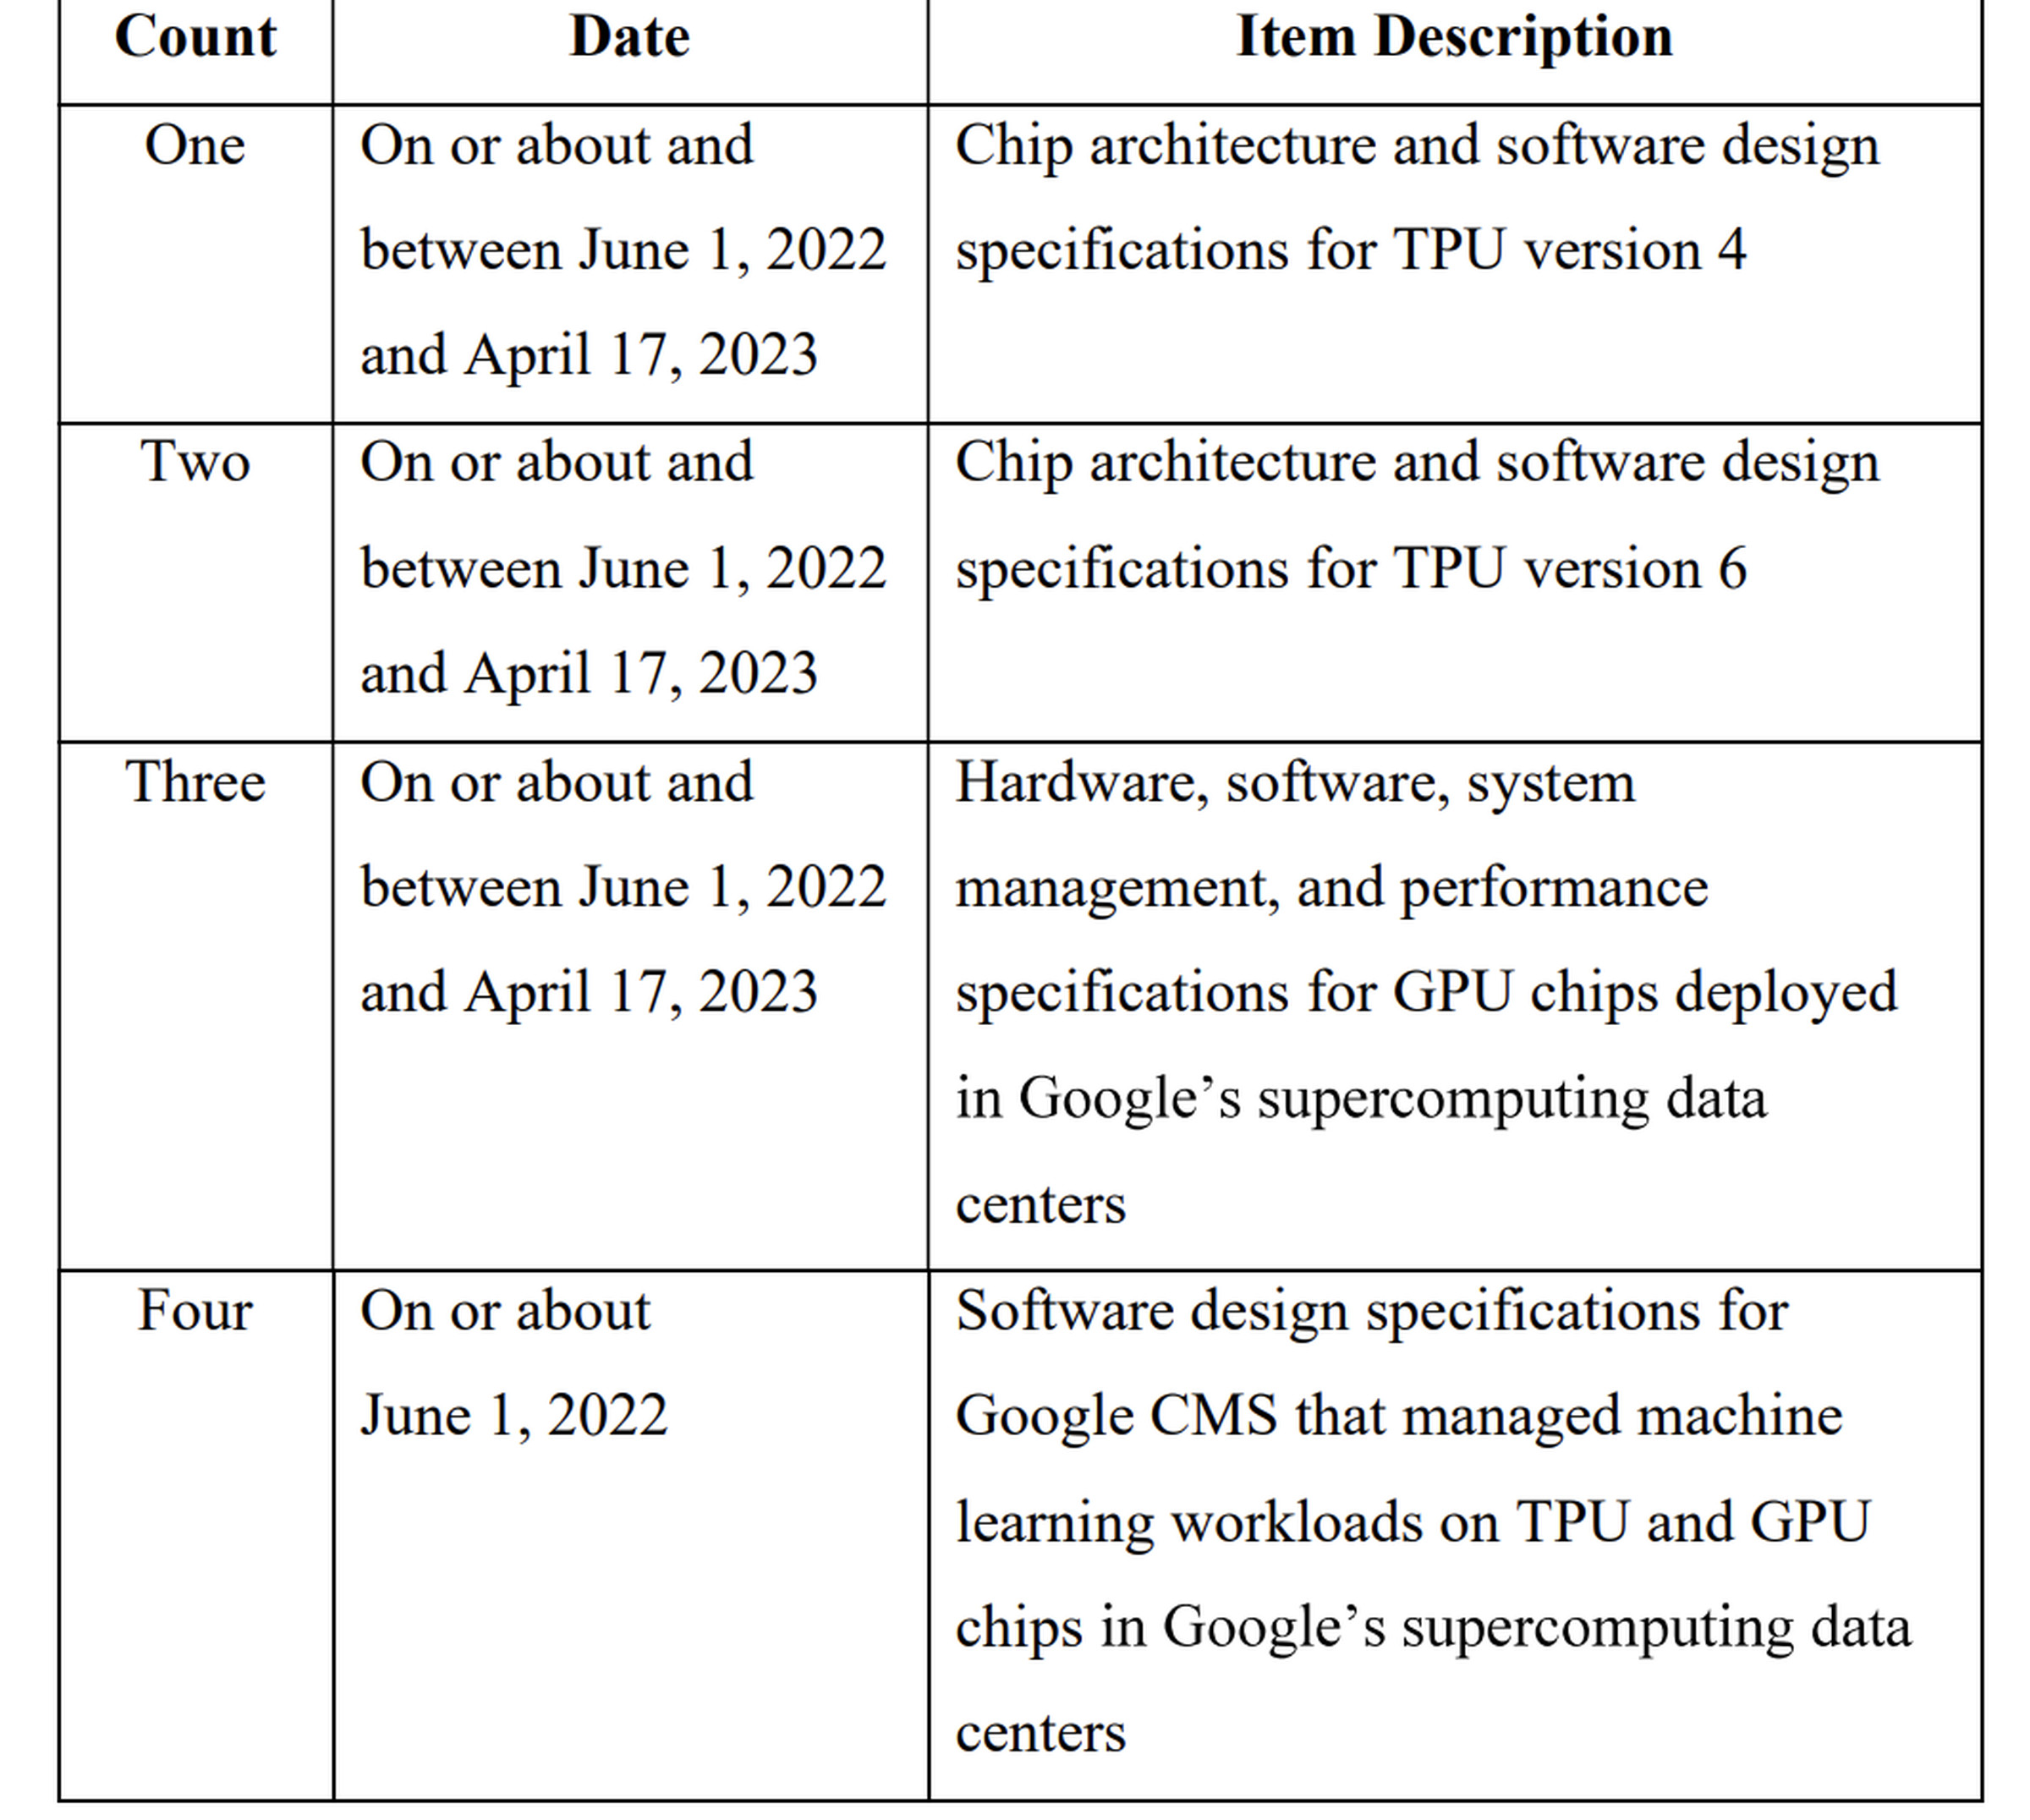 Table listing stolen technology linked to Google TPUs, GPUs, and supercomputing data centers.